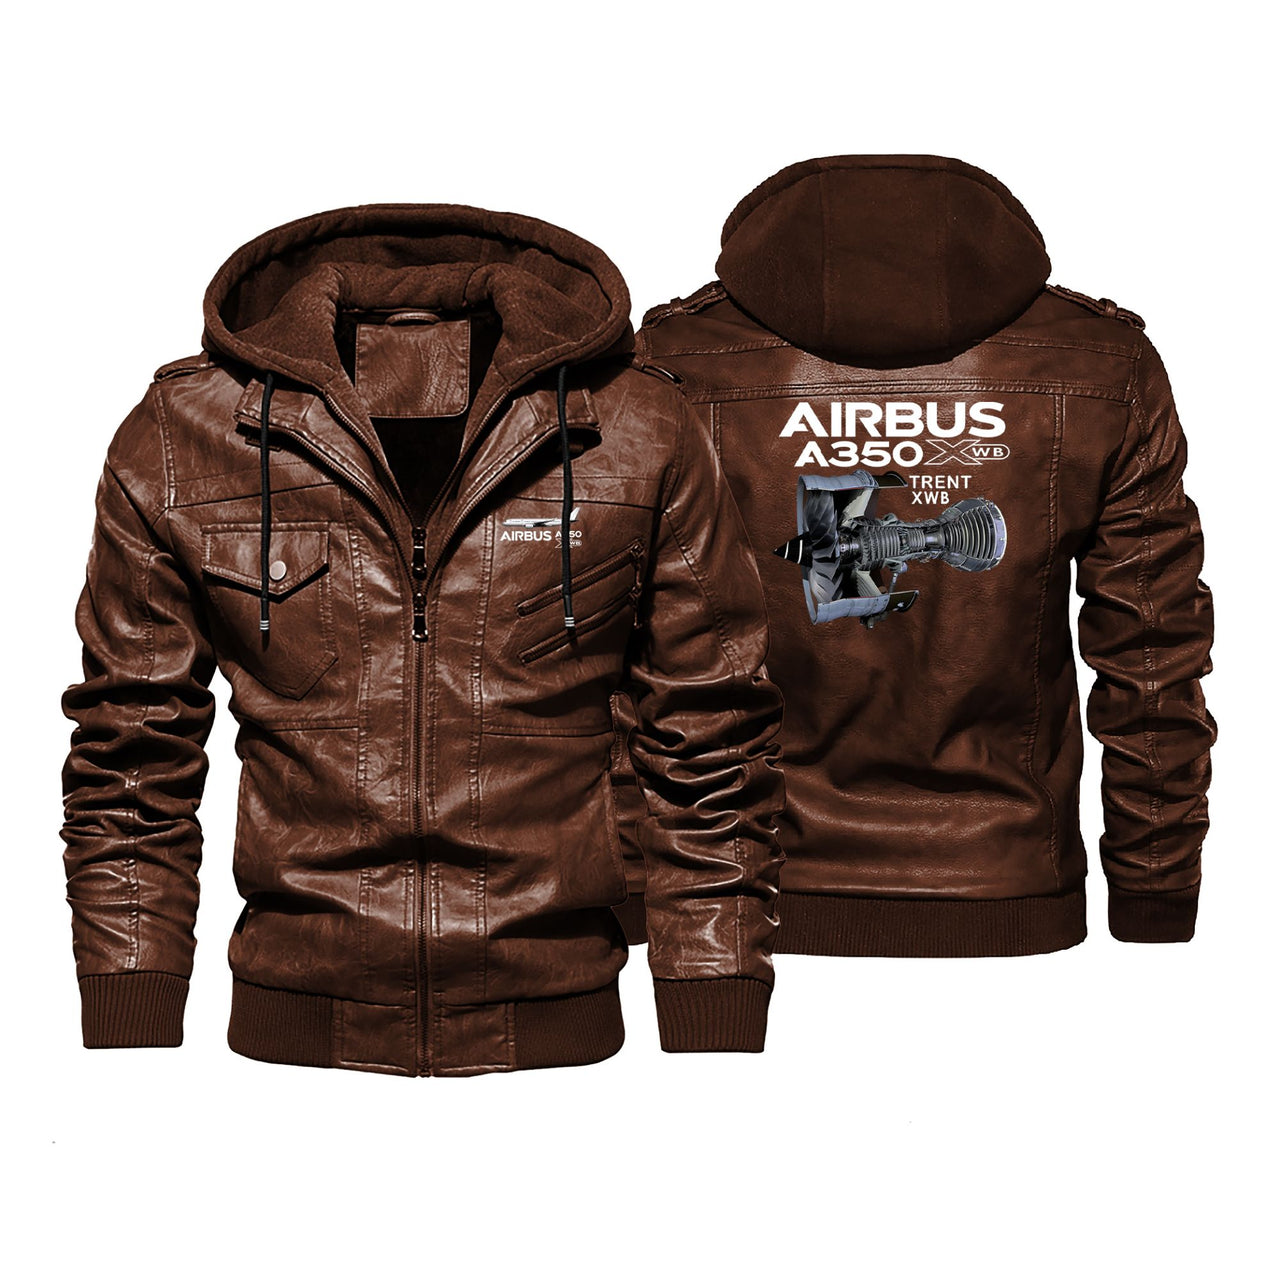 Airbus A350 & Trent XWB Engine Designed Hooded Leather Jackets